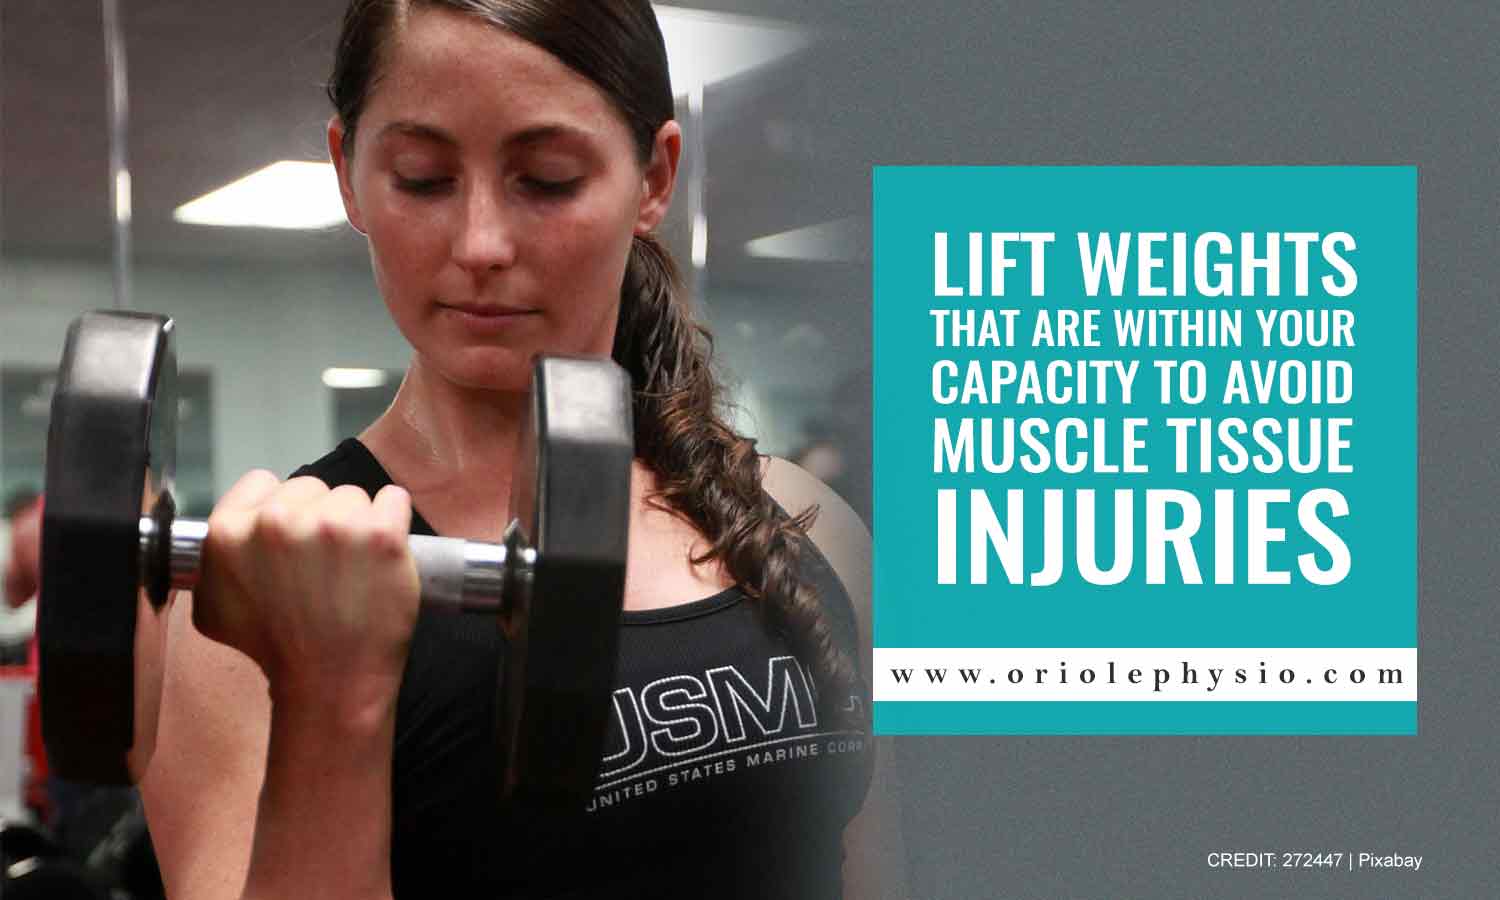 Lift weights that are within your capacity to avoid muscle tissue injuries